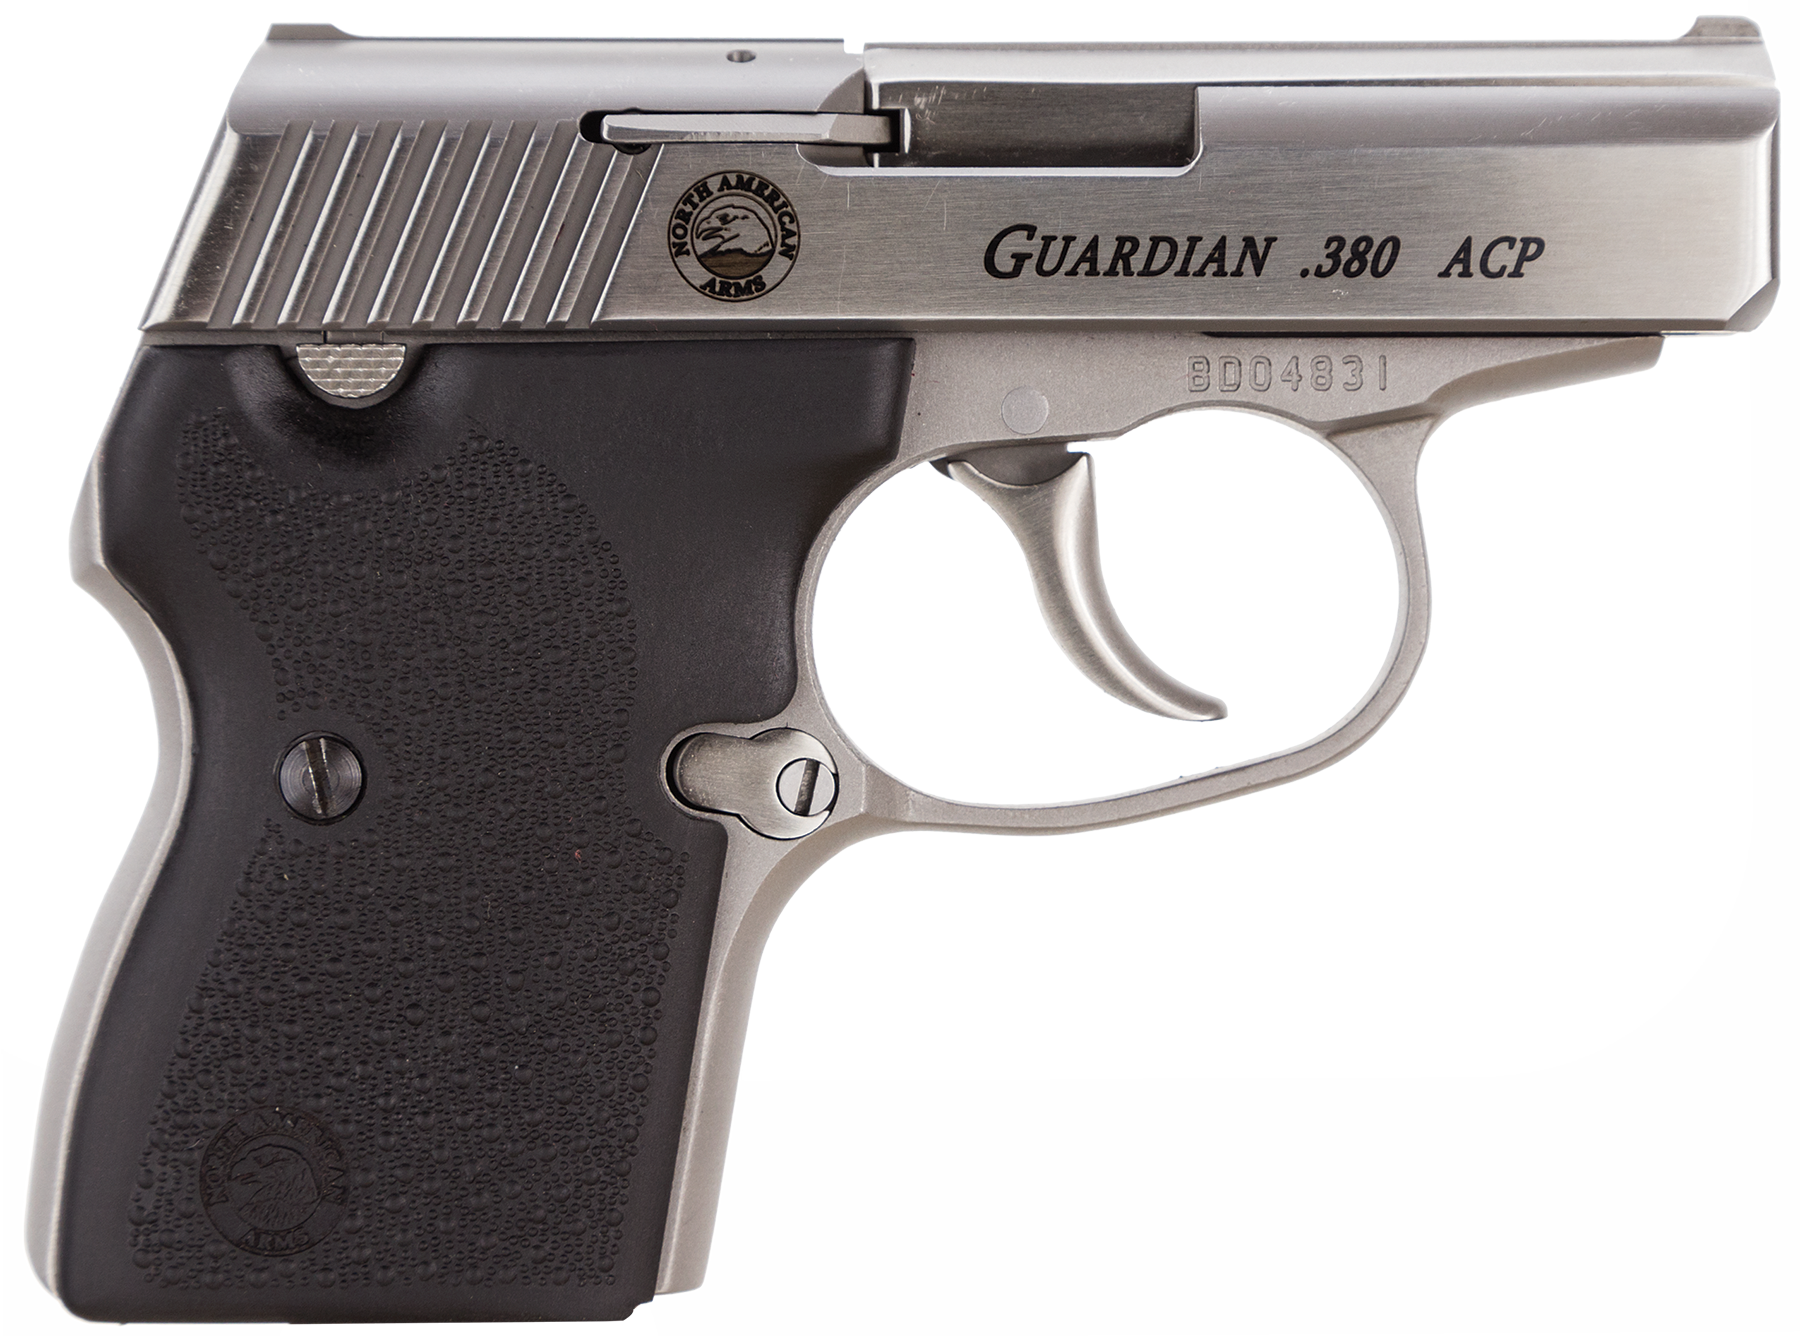 Image of NAA 380 Guardian 380 ACP 2.5" Barrel, Black Rubber Grip SS, Integral Locking Safety, 6rd